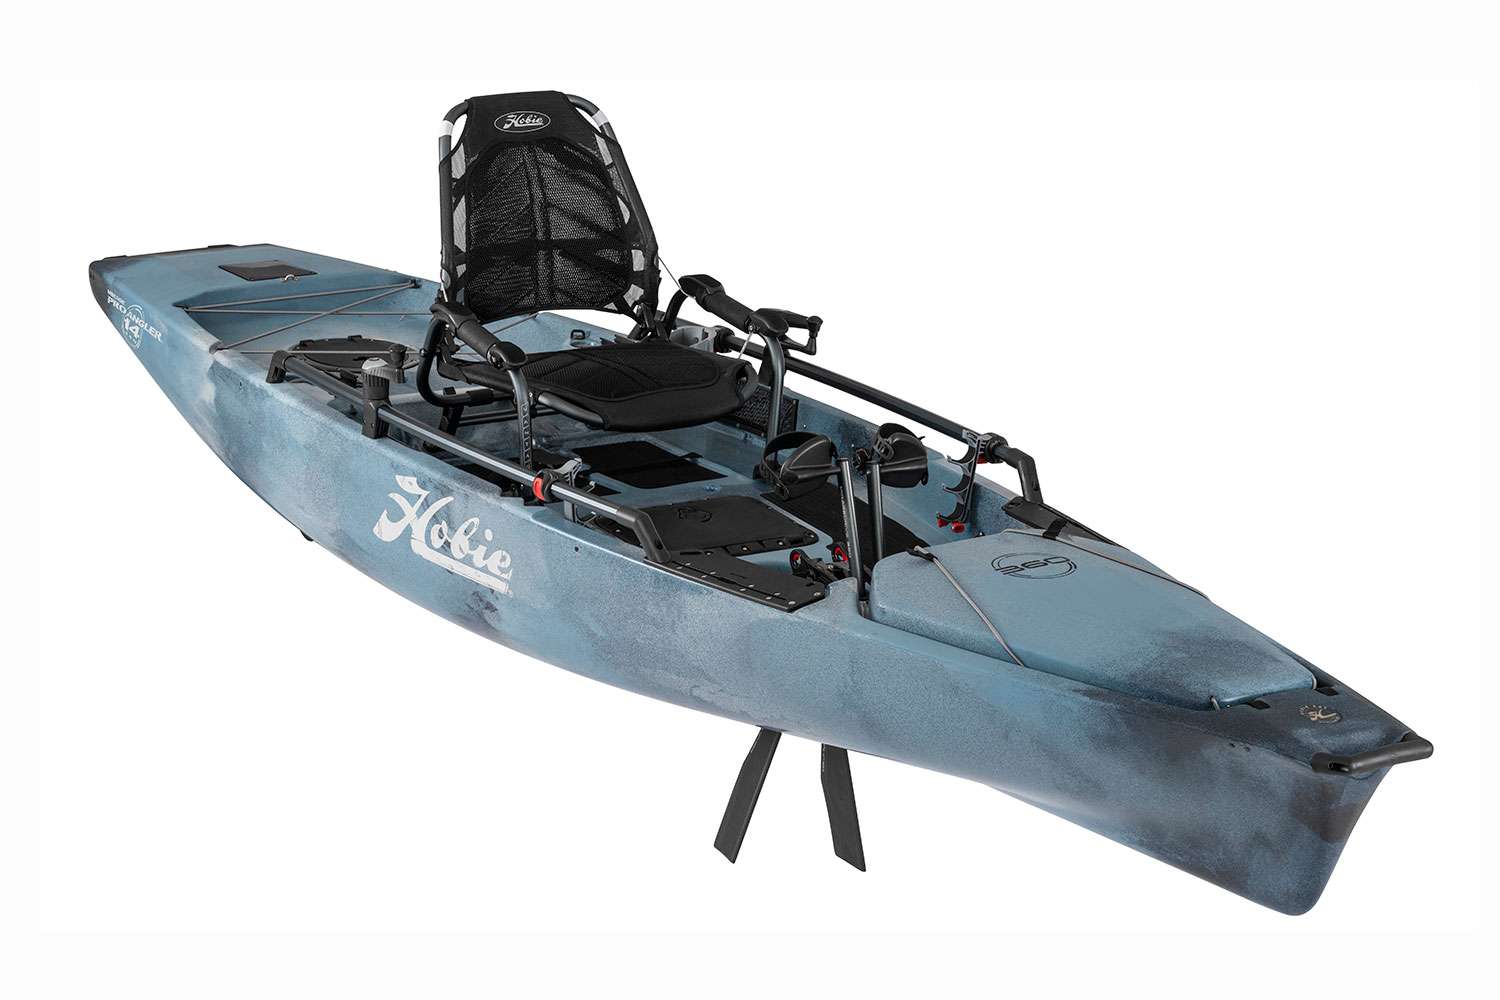 <p><b>Hobie Pro Angler 14 with MirageDrive 360</b></p>
Truly the ultimate fishing machine â the 2020 Pro Angler 14 with the MirageDrive 360 and Kick-Up Fins delivers power in every direction for unprecedented maneuverability and control. Staying on top of the fish has never been easier. Available Fall 2019. Everything hardcore kayak anglers are looking for in a fishing kayak â total control, power, stability, performance, stealth, comfort and feature rich. Its wide, rock-solid standing platform comes decked out with noise reducing EVA traction pads. Explore wherever you want to go with the all-new Kick-Up fins that automatically retract upon impact. Ultra-comfortable, adjustable Vantage ST seat, dual steering, Guardian Retractable Transducer Shield and an extra-wide beam allows for long days on the water. Mount your rod holders and electronics othe 12-sided Hobie H-Rail bars. <br>
<p><b>MSRP: $4,799</b></p>
<a href=